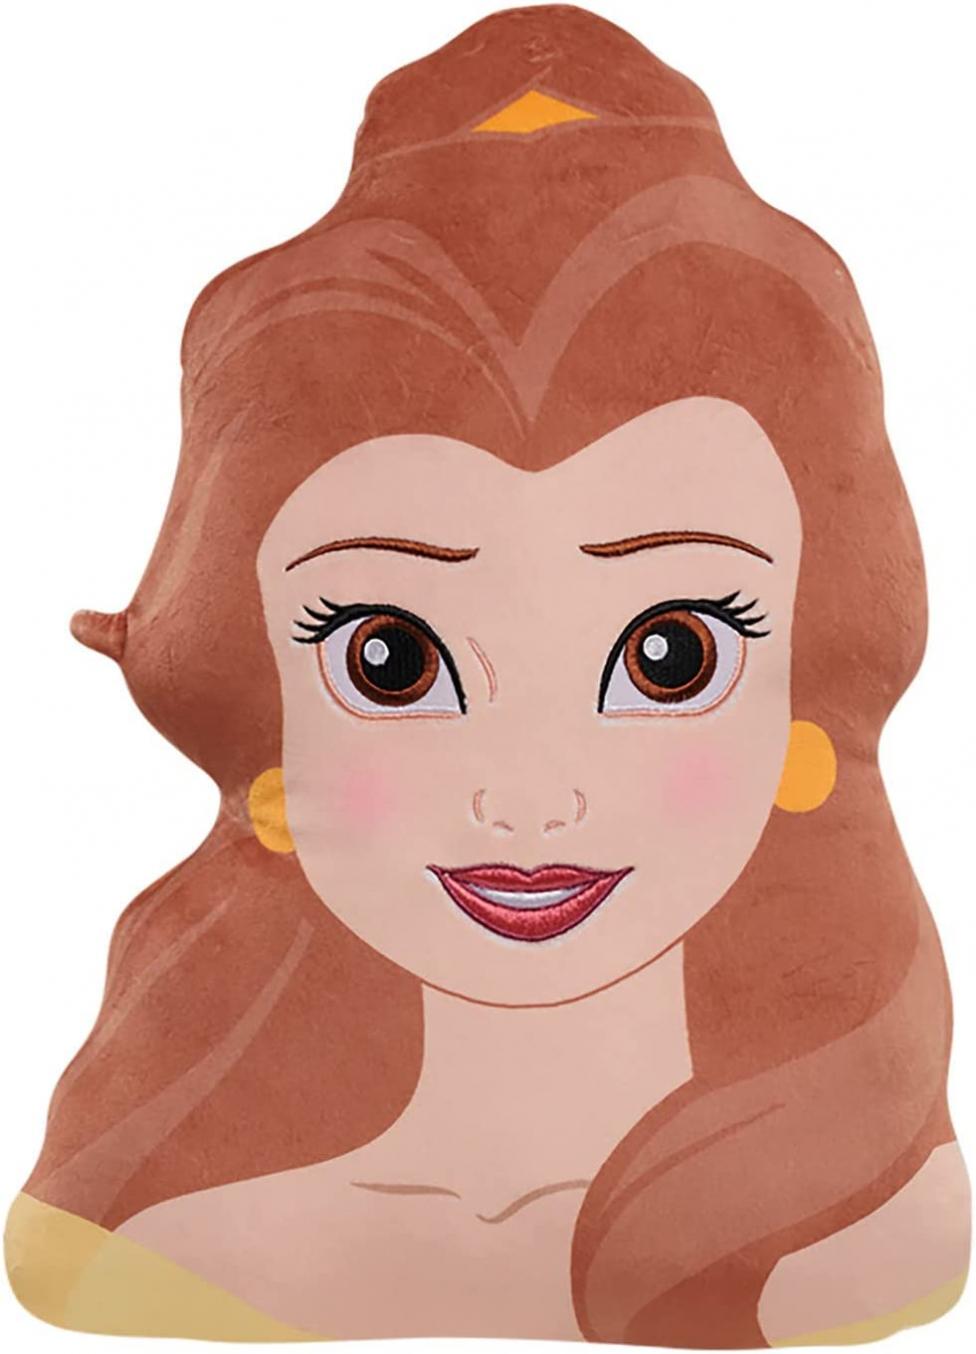 Disney Princess Character Heads Plush Belle, Officially Licensed Kids Toys for Ages 3 Up, Gifts and Presents by Just Play